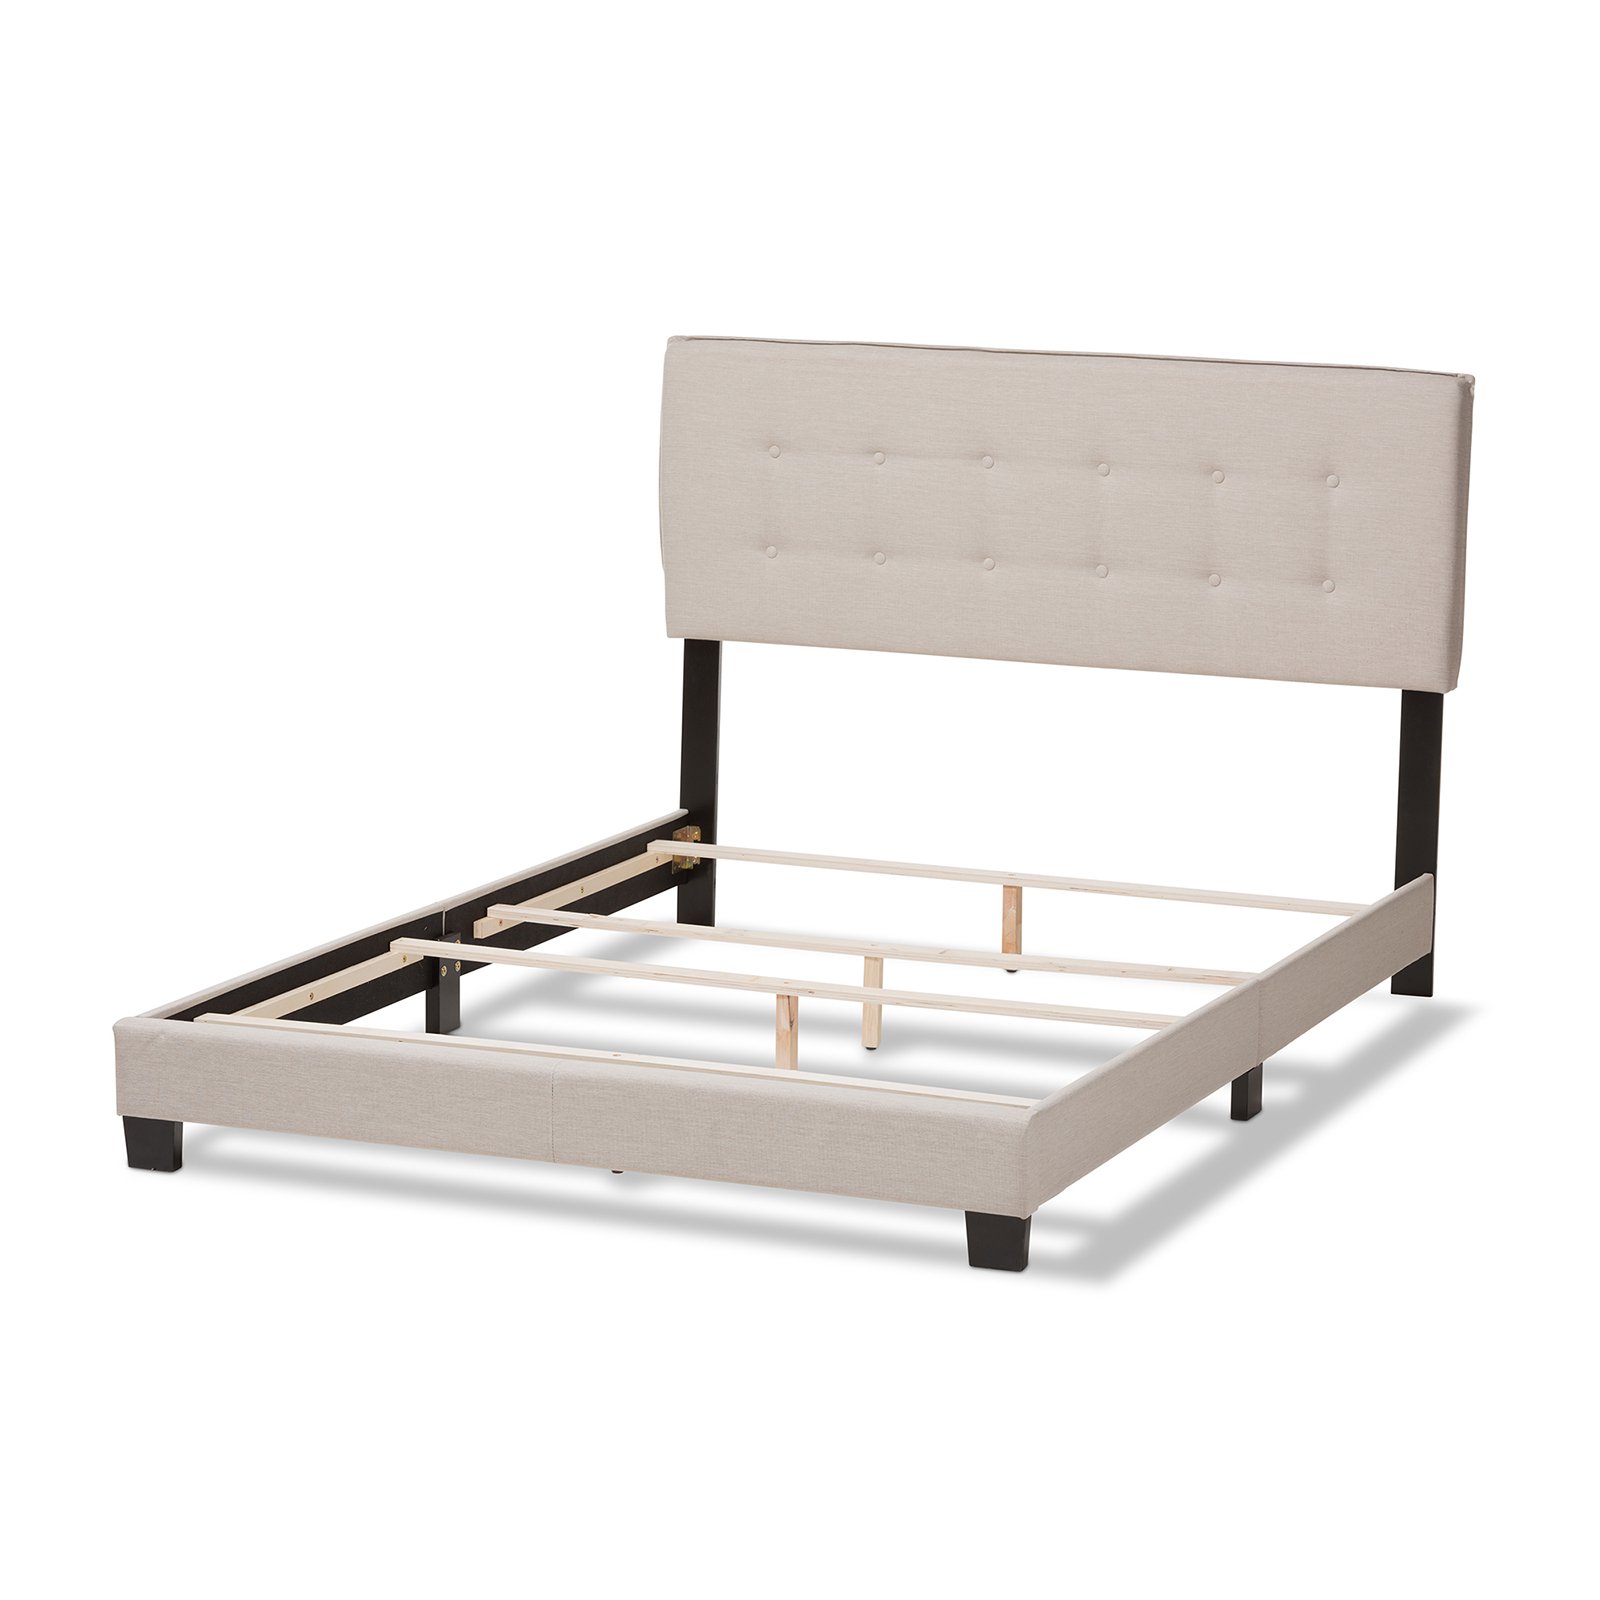 Baxton Studio Audrey Modern and Contemporary Upholstered Bed, Multiple Sizes, Multiple Colors - image 4 of 10